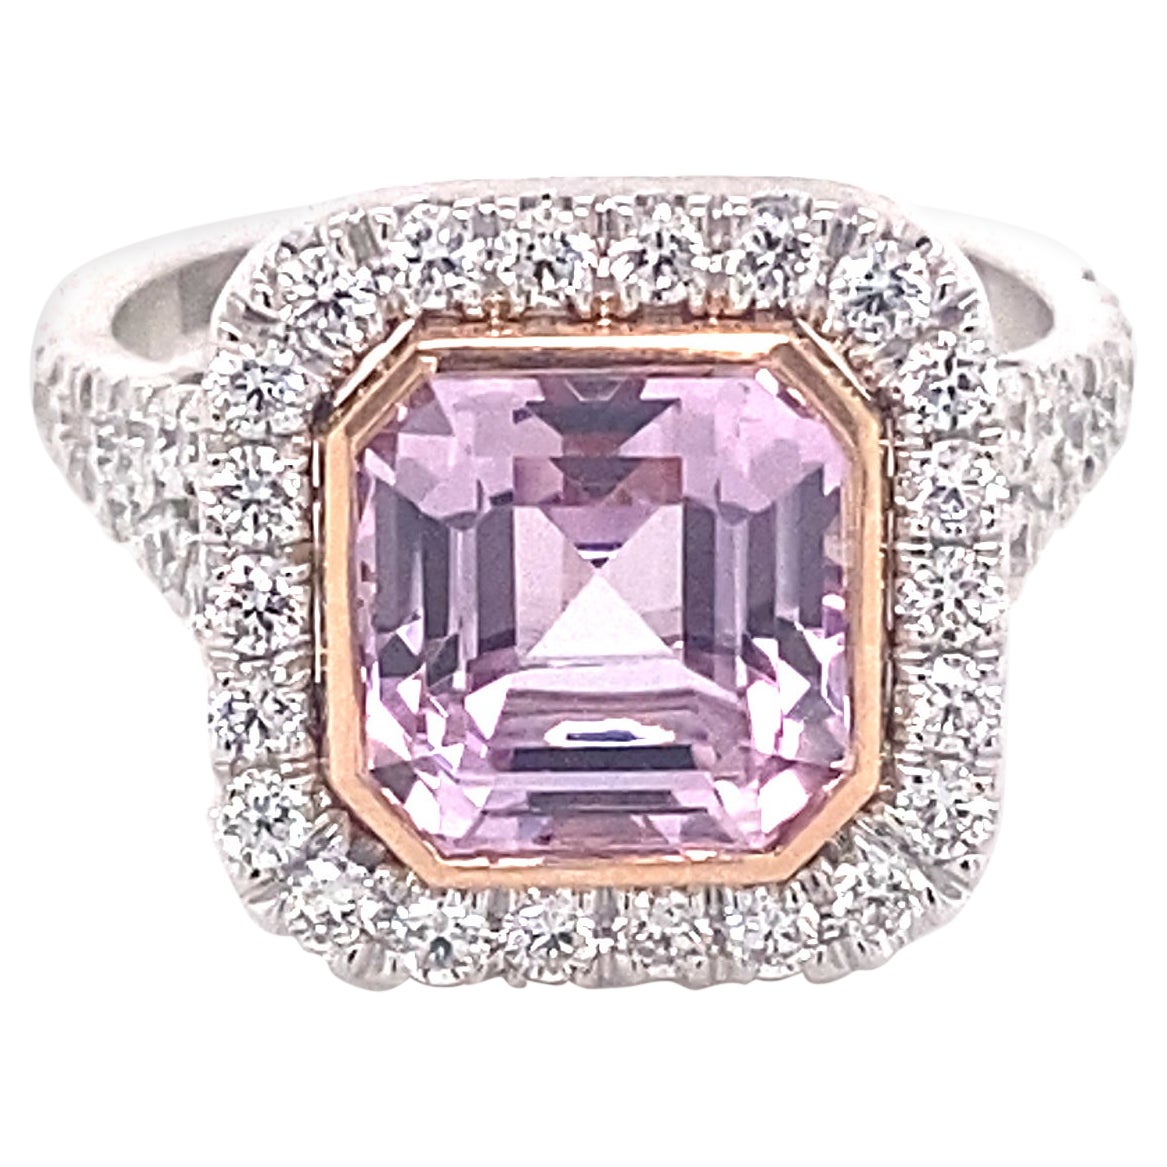 4.14ct Natural Asscher Cut Purple-Pink Sapphire Ring, 14kt White Gold Ring, GIA